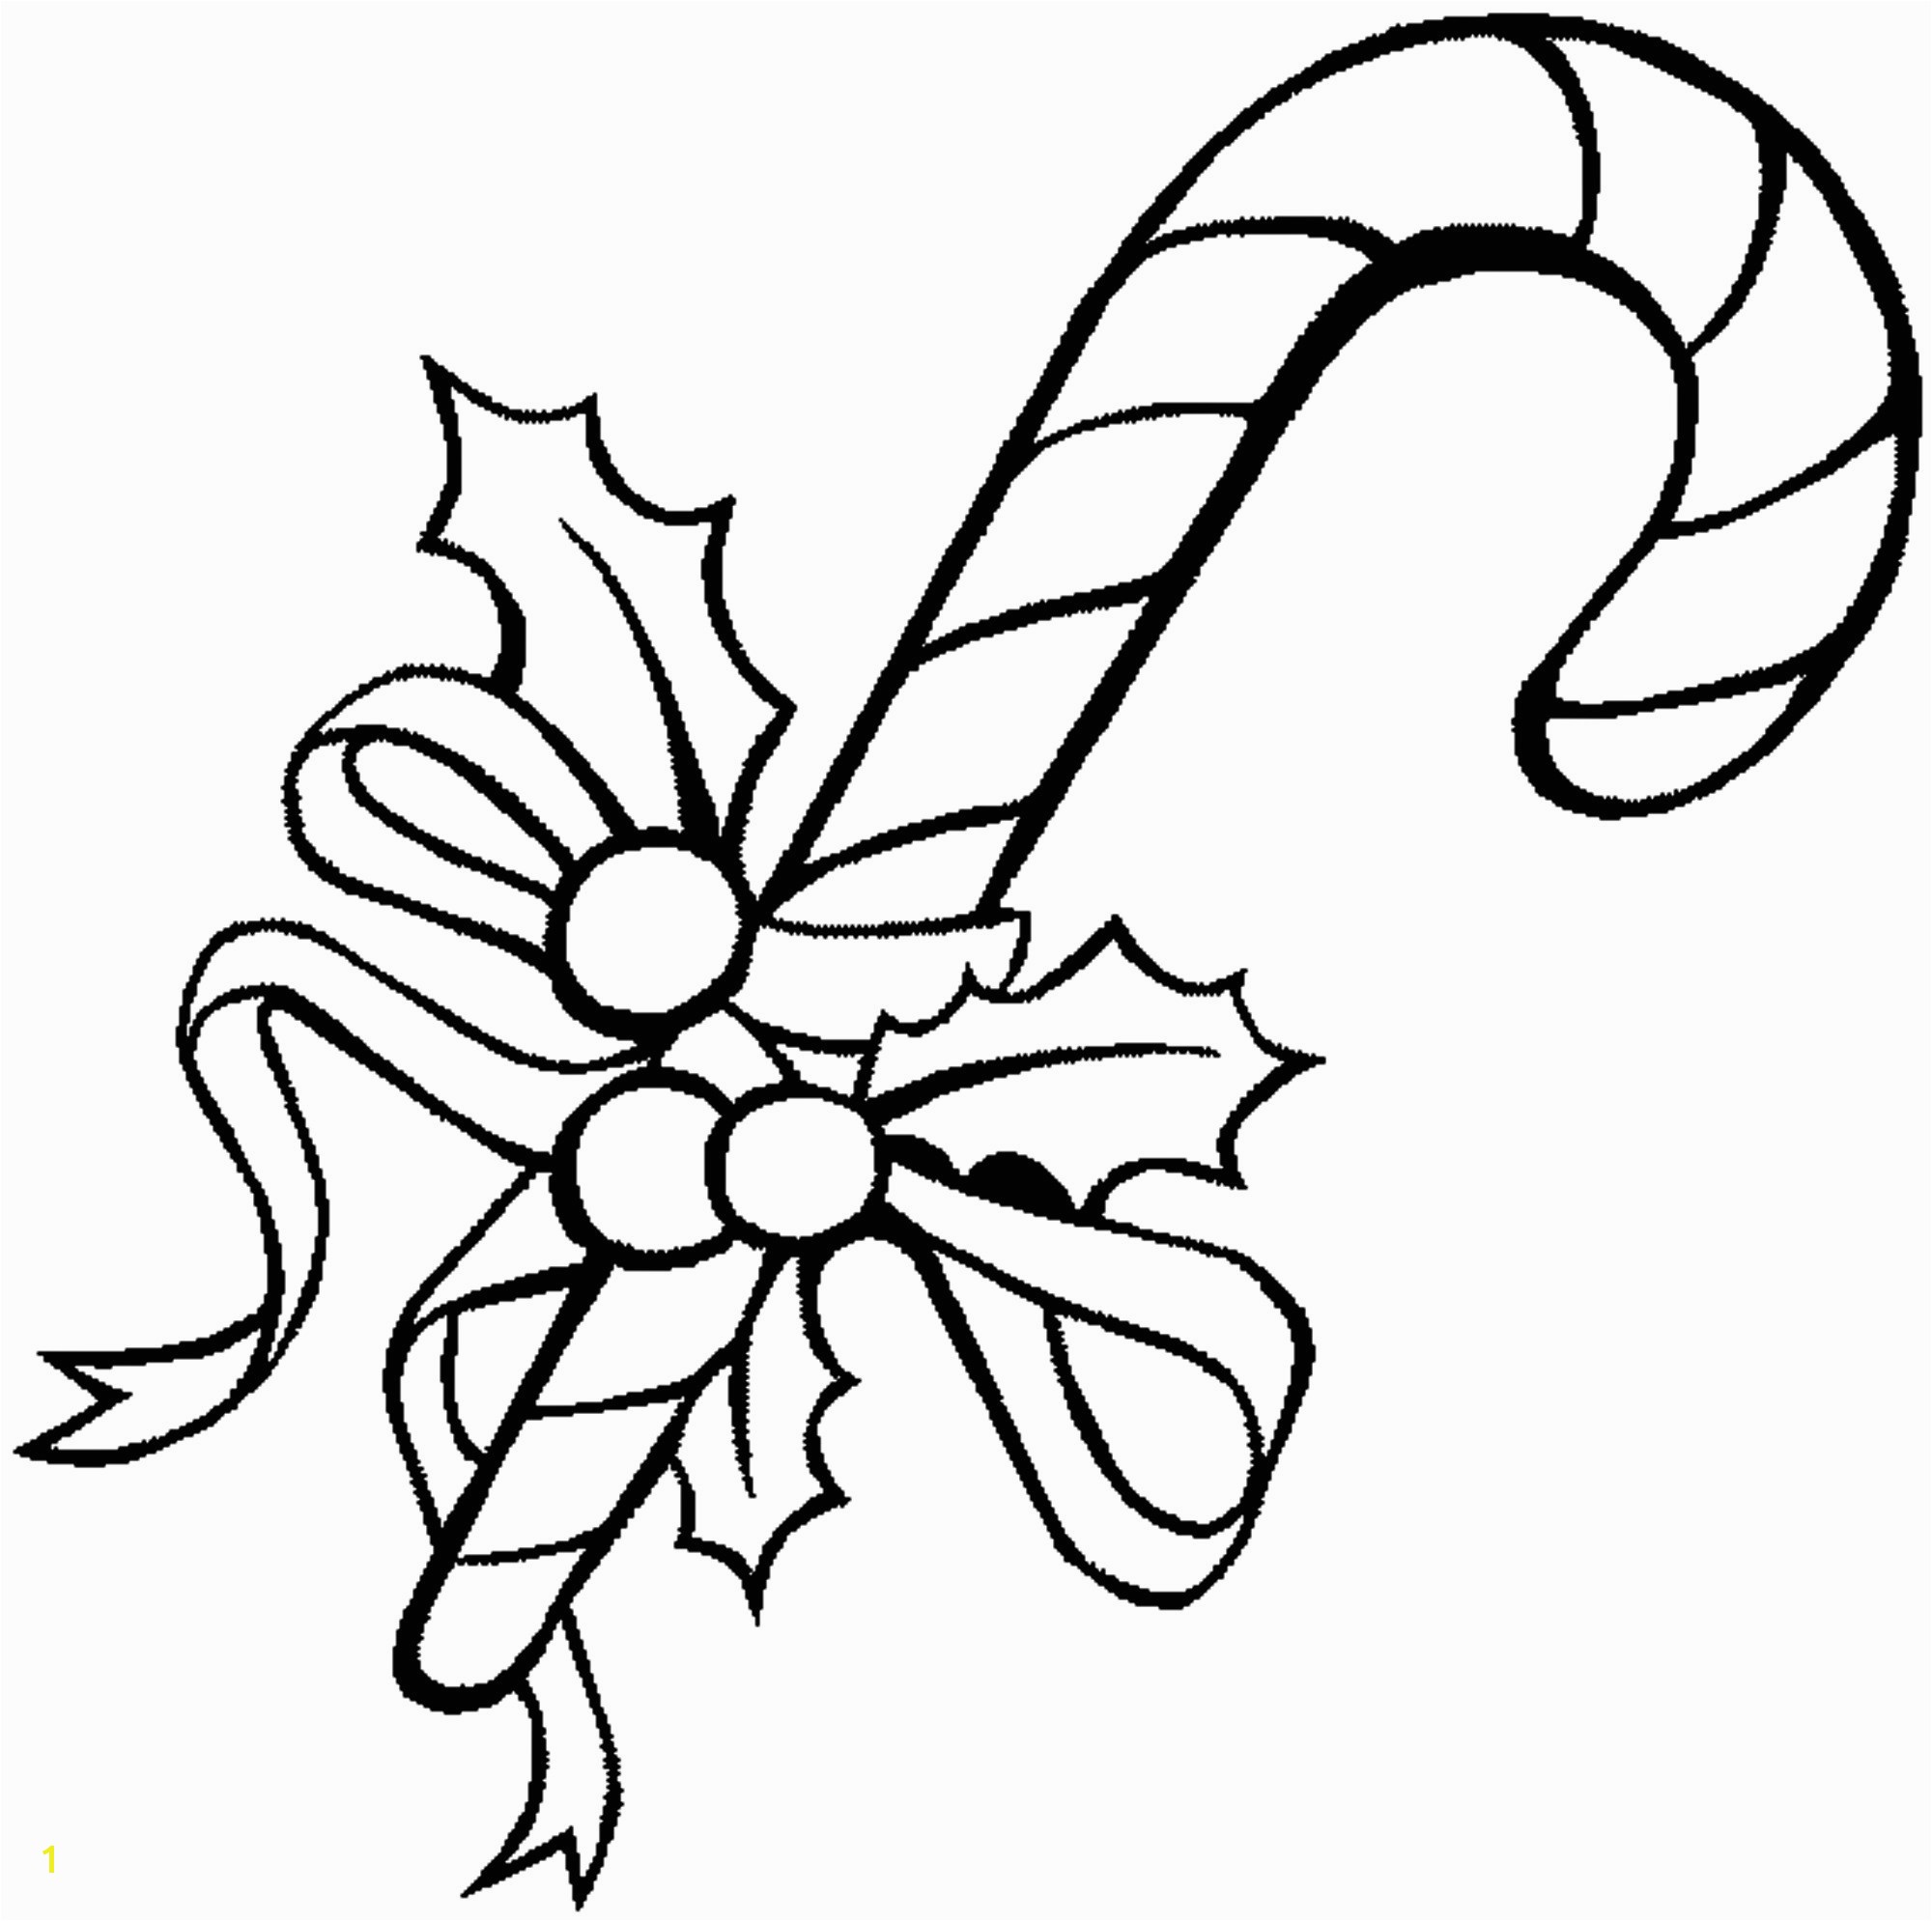 Suddenly Peppermint Coloring Pages 21 Unique Candy Cane Logo And Design Ideas Luxury Sugar Gallery